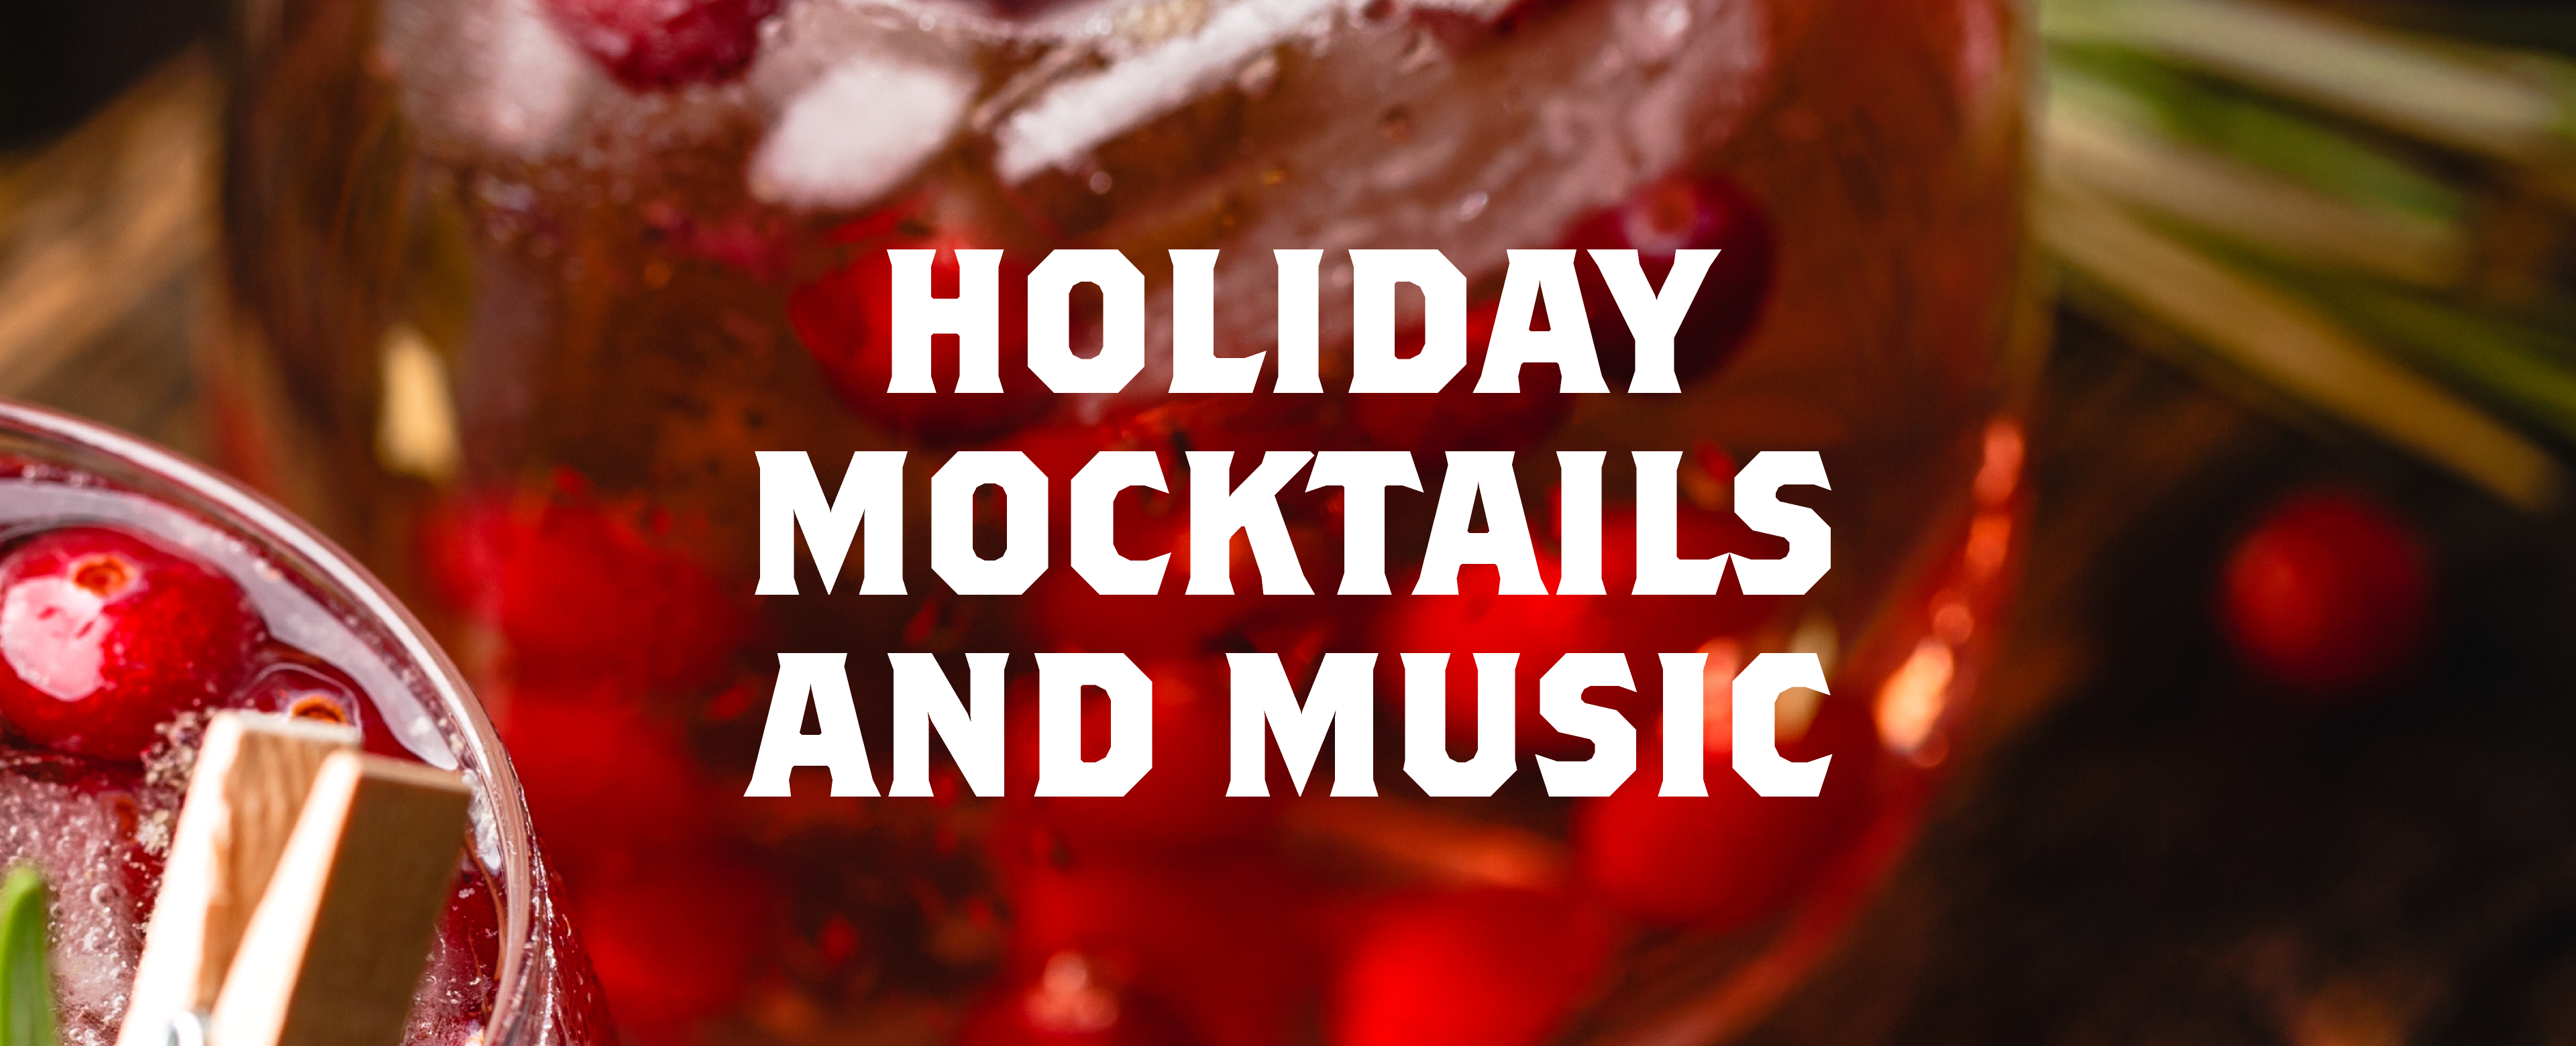 Holiday Mocktails and Music